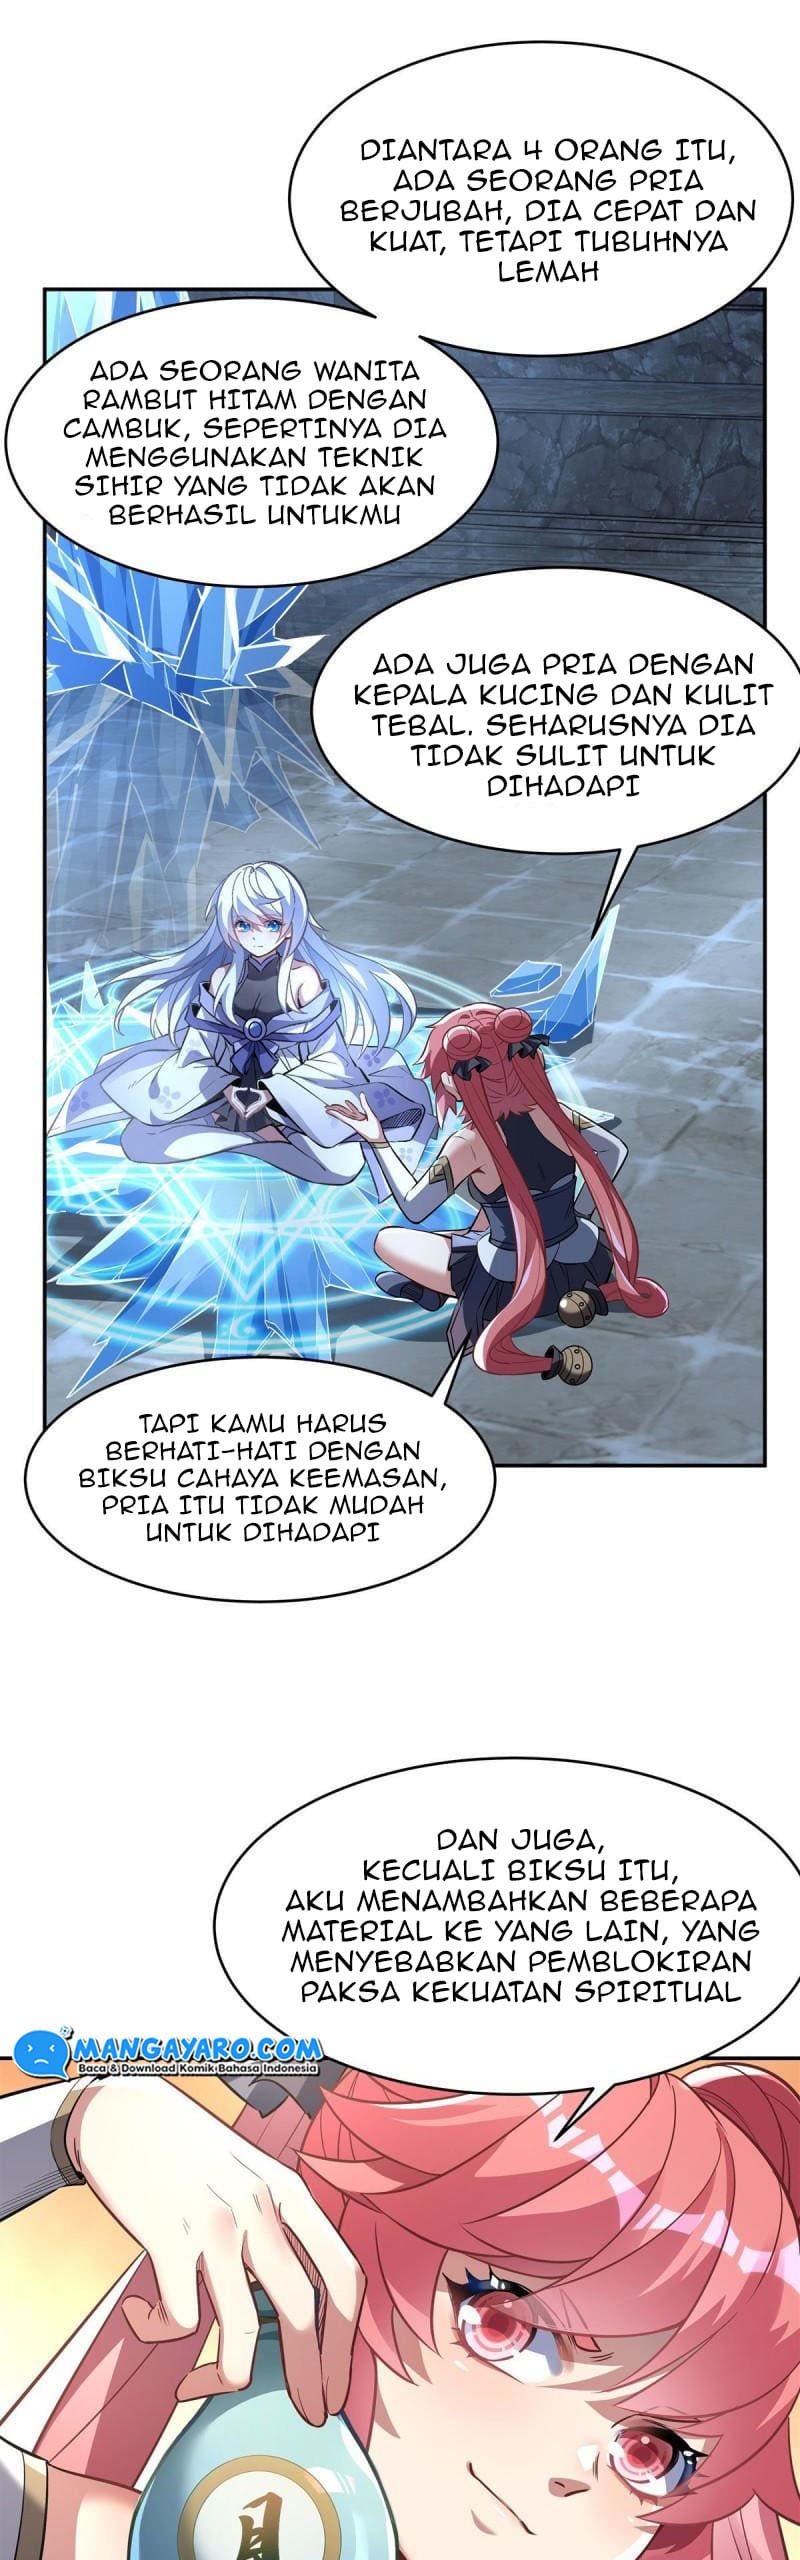 Dilarang COPAS - situs resmi www.mangacanblog.com - Komik my female apprentices are all big shots from the future 065 - chapter 65 66 Indonesia my female apprentices are all big shots from the future 065 - chapter 65 Terbaru 24|Baca Manga Komik Indonesia|Mangacan